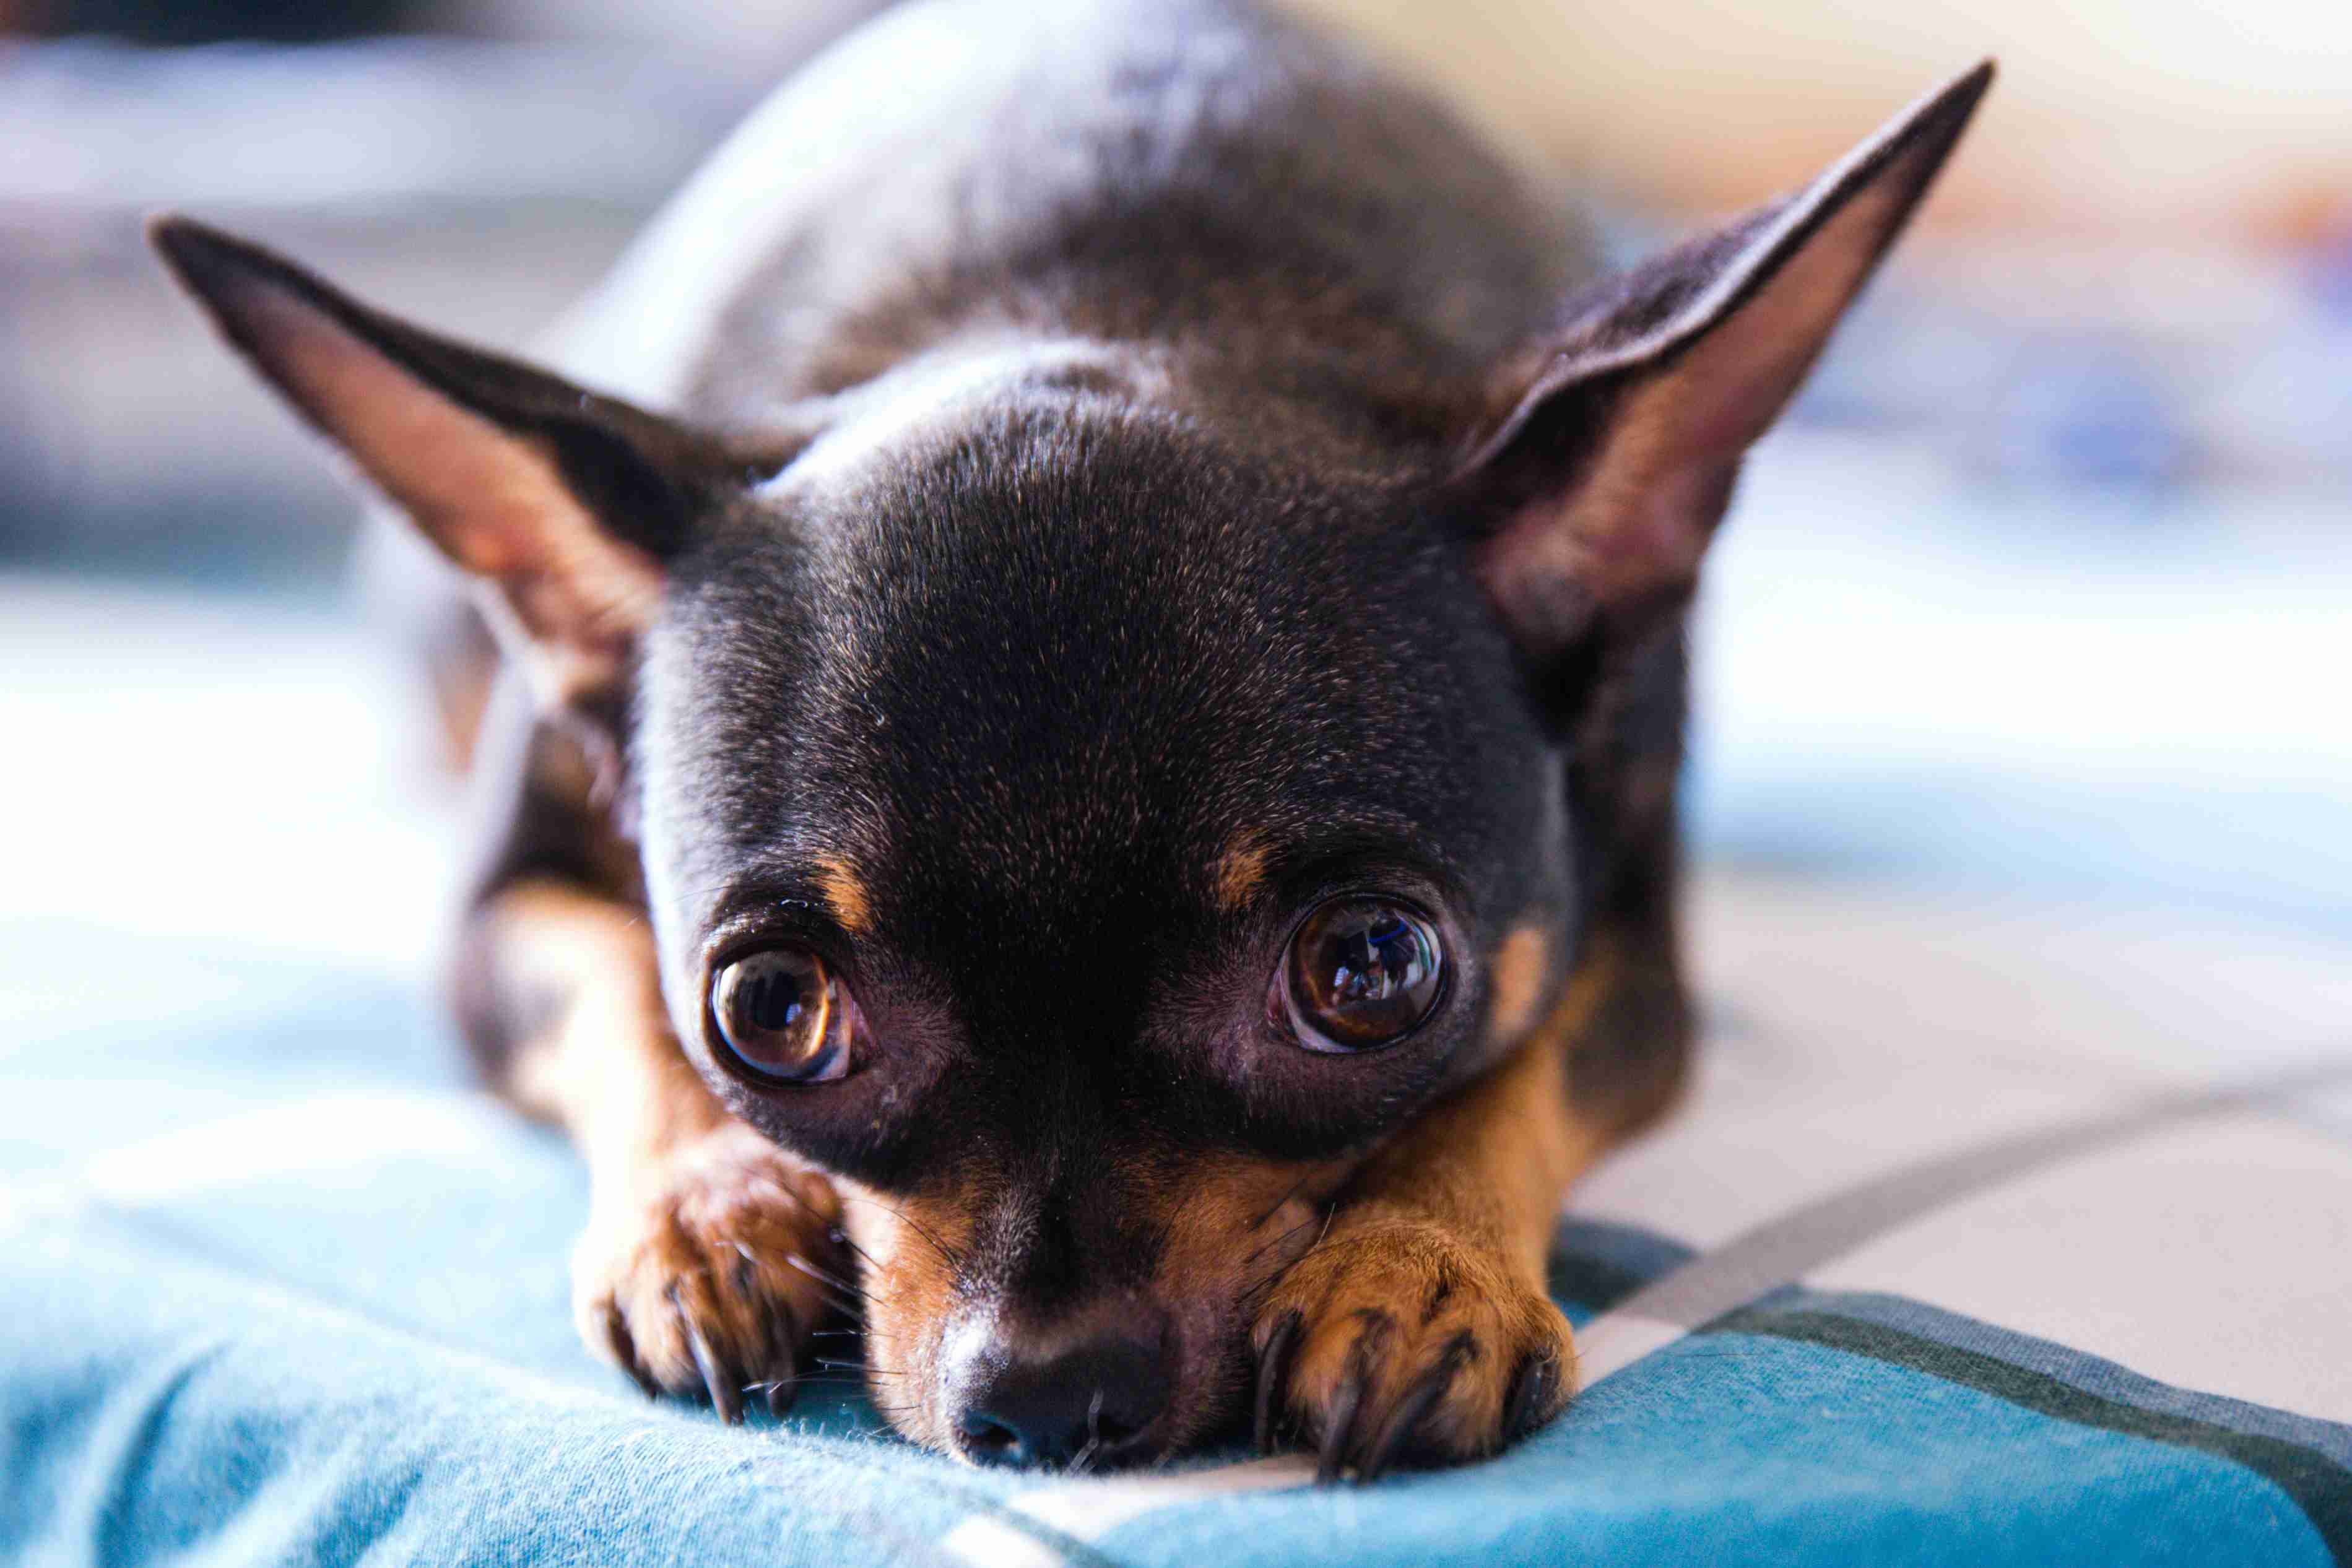 Can professional help, such as a dog trainer or behaviorist, be beneficial in managing a Chihuahua's anger?